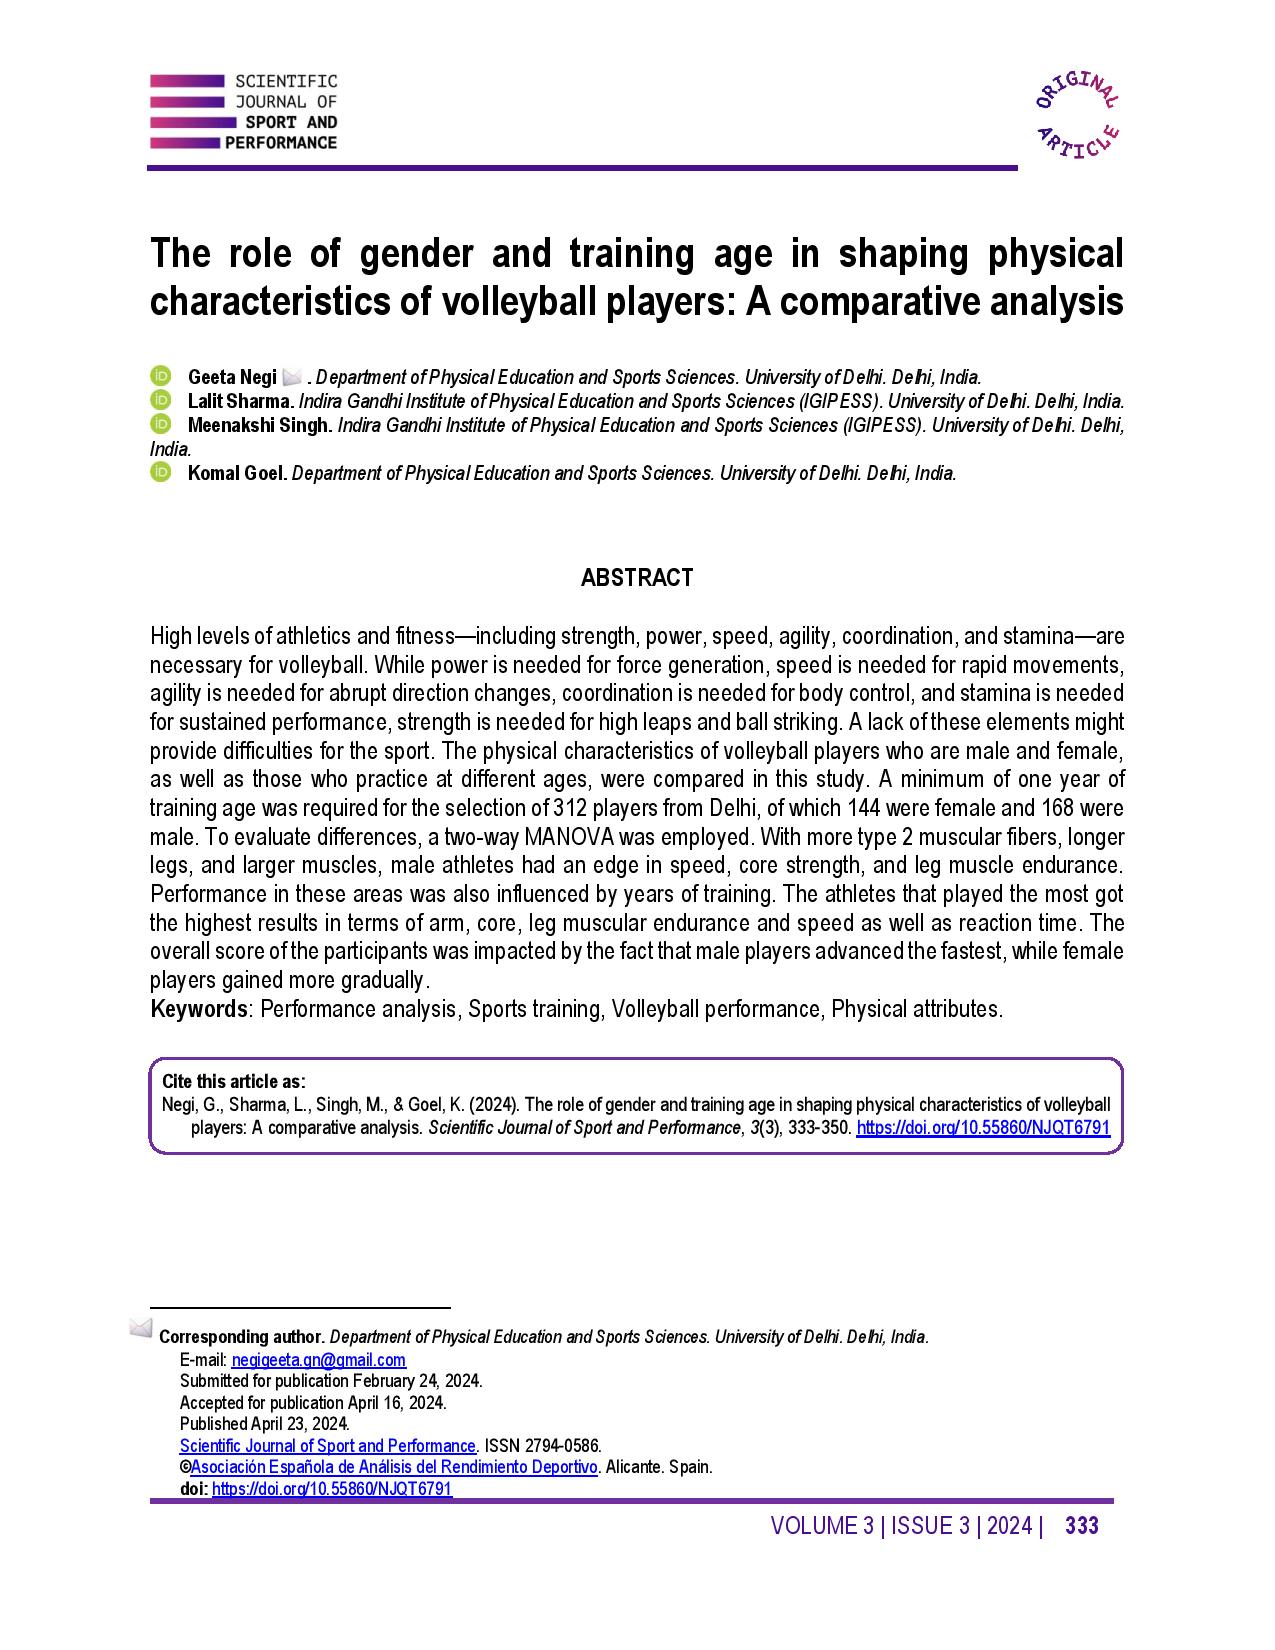 The role of gender and training age in shaping physical characteristics of volleyball players: A comparative analysis